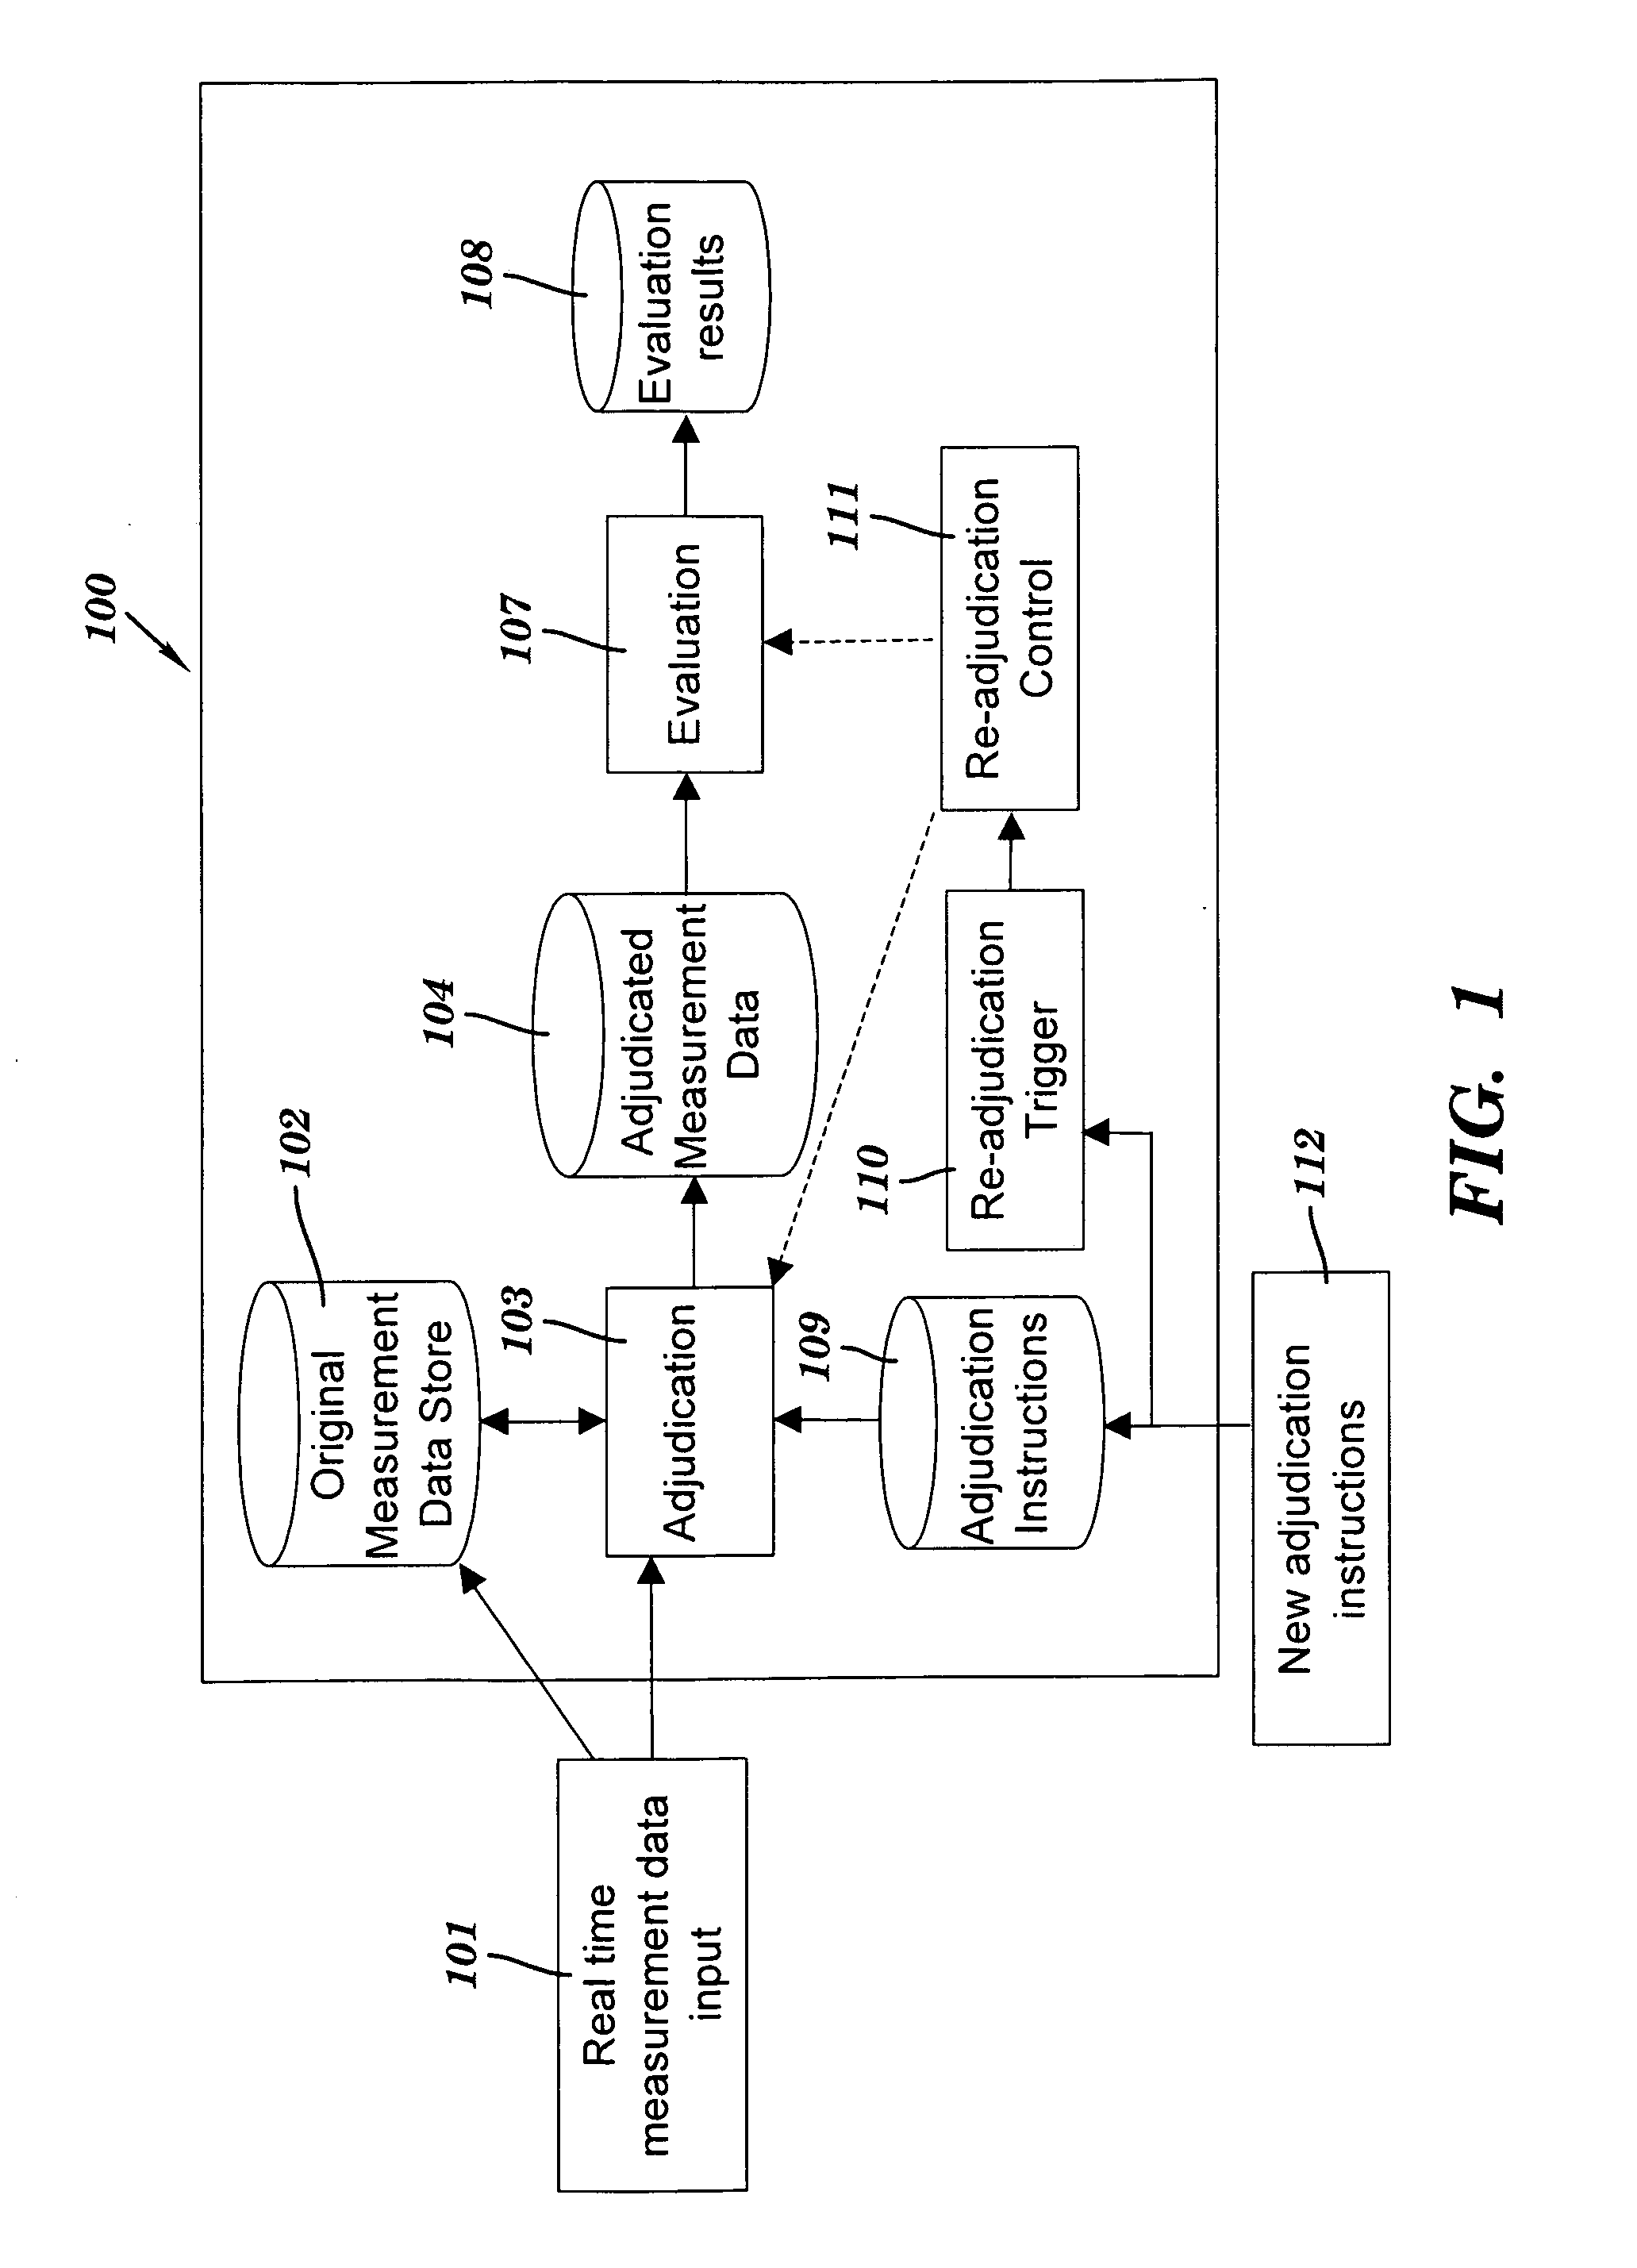 Method and system for real time measurement data adjudication and service level evaluation